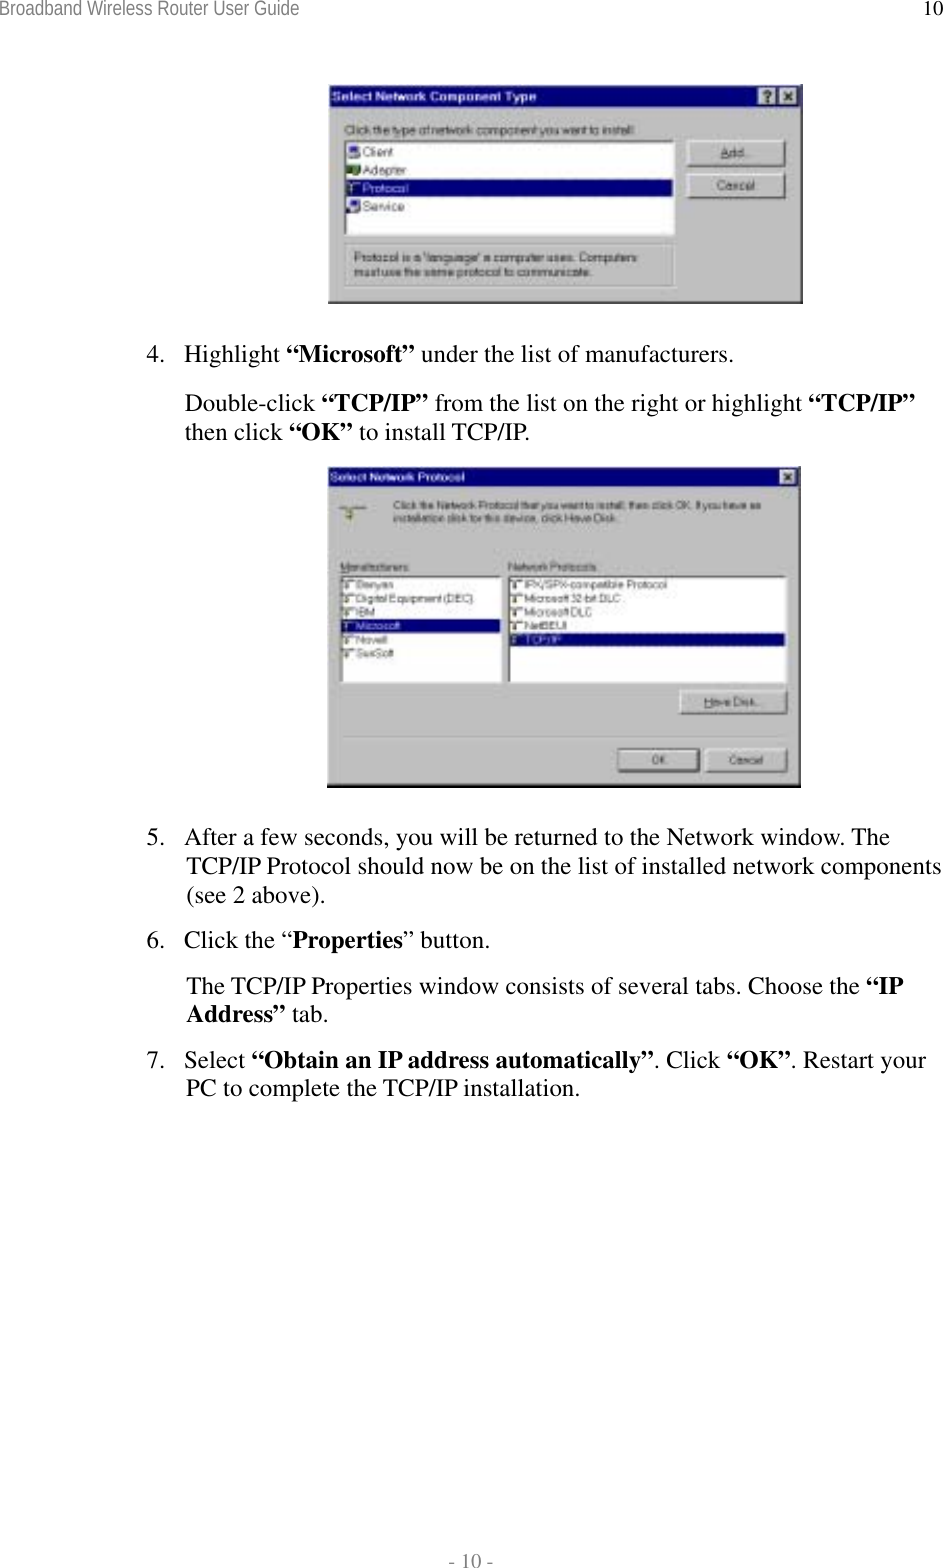 Broadband Wireless Router User Guide  - 10 - 10 4. Highlight “Microsoft” under the list of manufacturers. Double-click “TCP/IP” from the list on the right or highlight “TCP/IP” then click “OK” to install TCP/IP.  5.  After a few seconds, you will be returned to the Network window. The TCP/IP Protocol should now be on the list of installed network components (see 2 above).  6.  Click the “Properties” button. The TCP/IP Properties window consists of several tabs. Choose the “IP Address” tab. 7. Select “Obtain an IP address automatically”. Click “OK”. Restart your PC to complete the TCP/IP installation.   